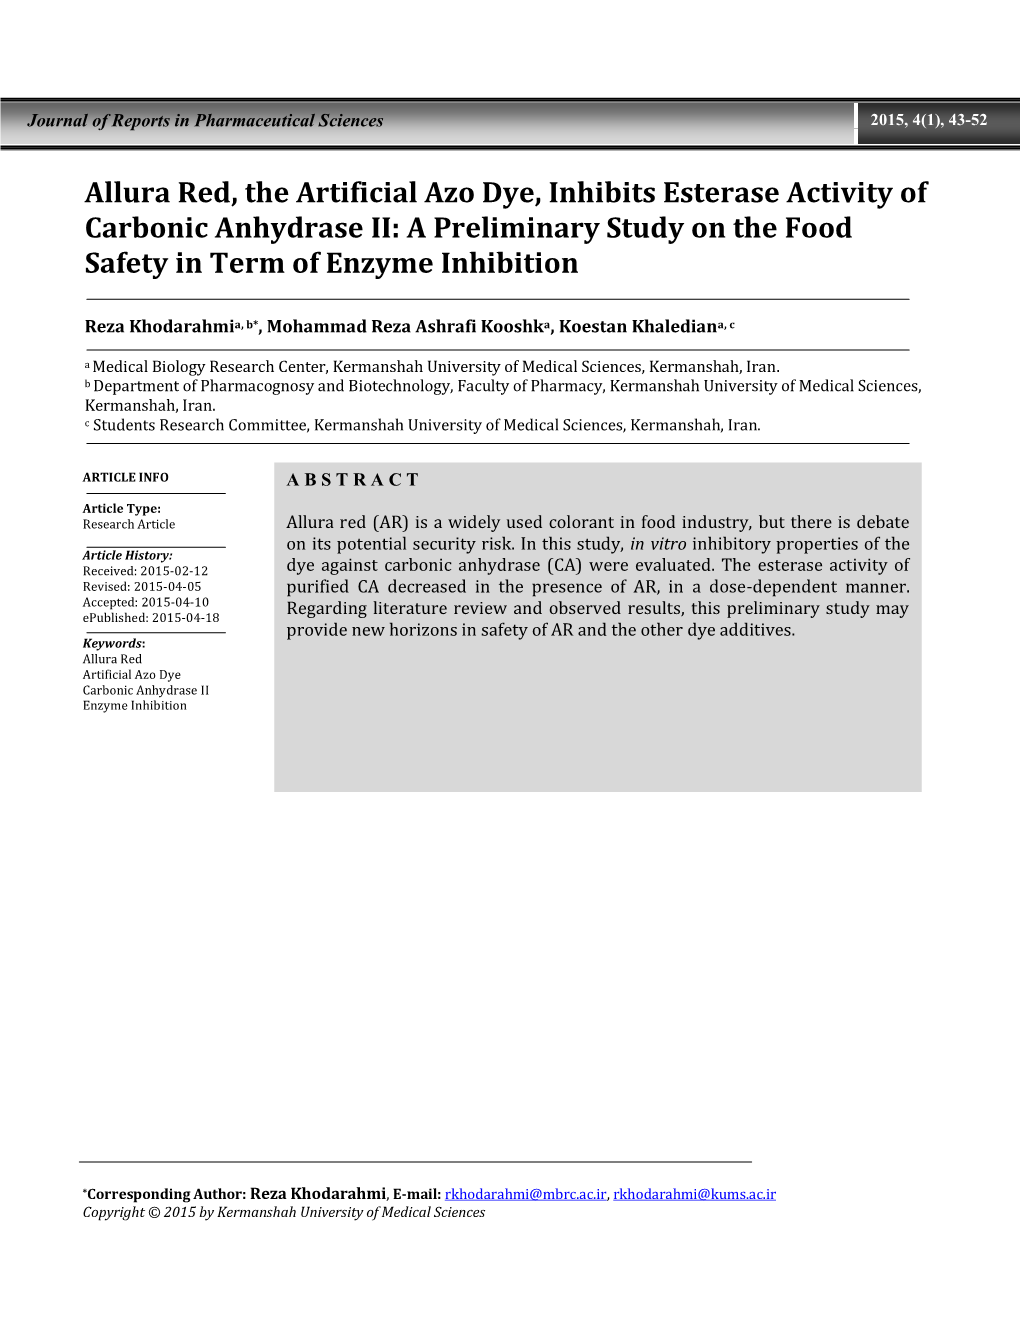 Allura Red, the Artificial Azo Dye, Inhibits Esterase Activity of Carbonic Anhydrase II: a Preliminary Study on the Food Safety in Term of Enzyme Inhibition